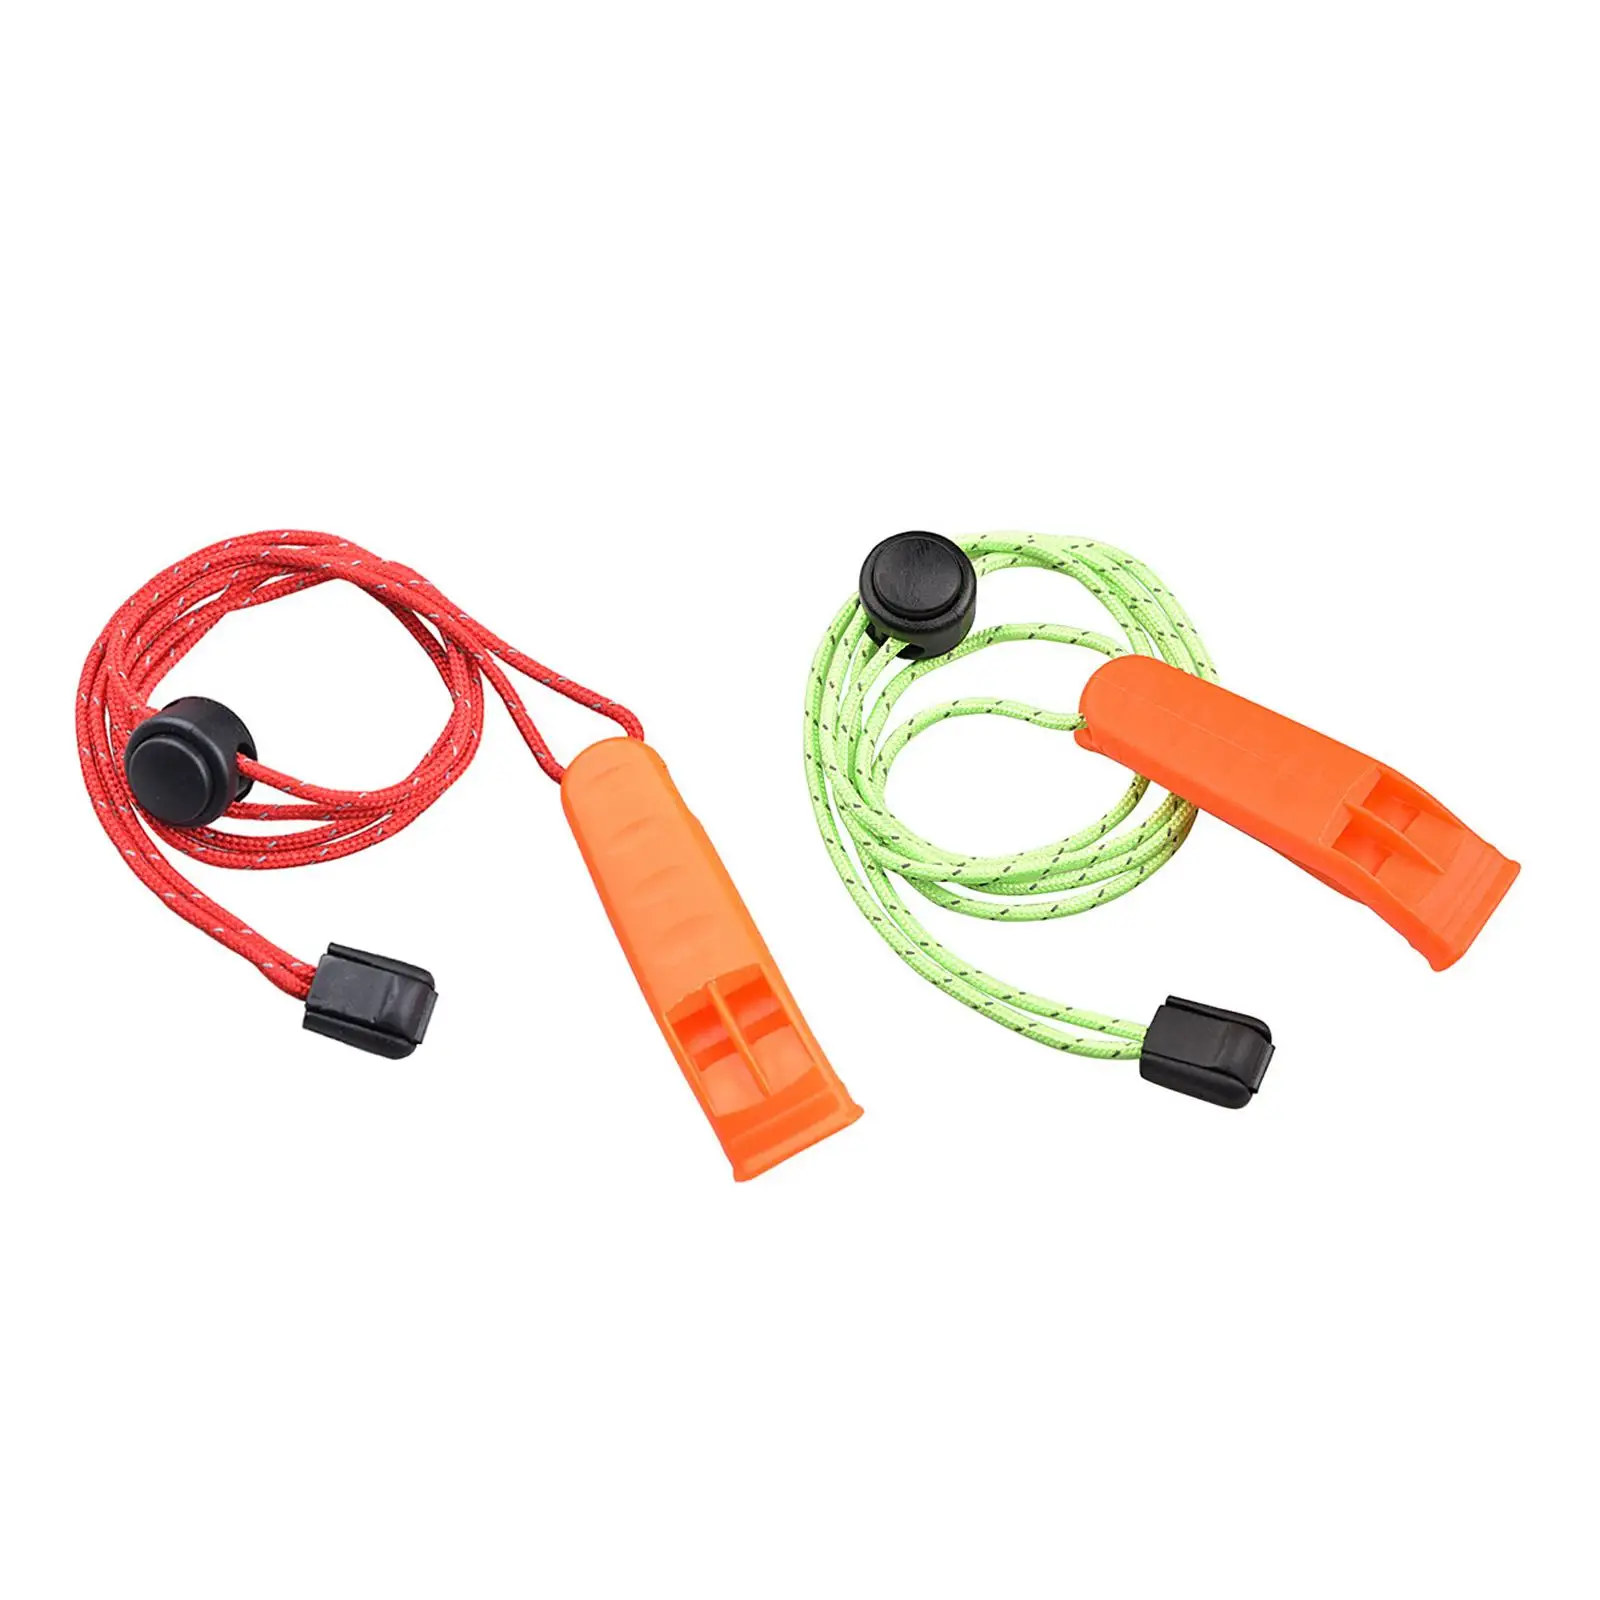 

Emergency s, Outdoor Safety Survival , with Lanyard Loud Sound for Camping Hunting Boating Hiking Kids Adults